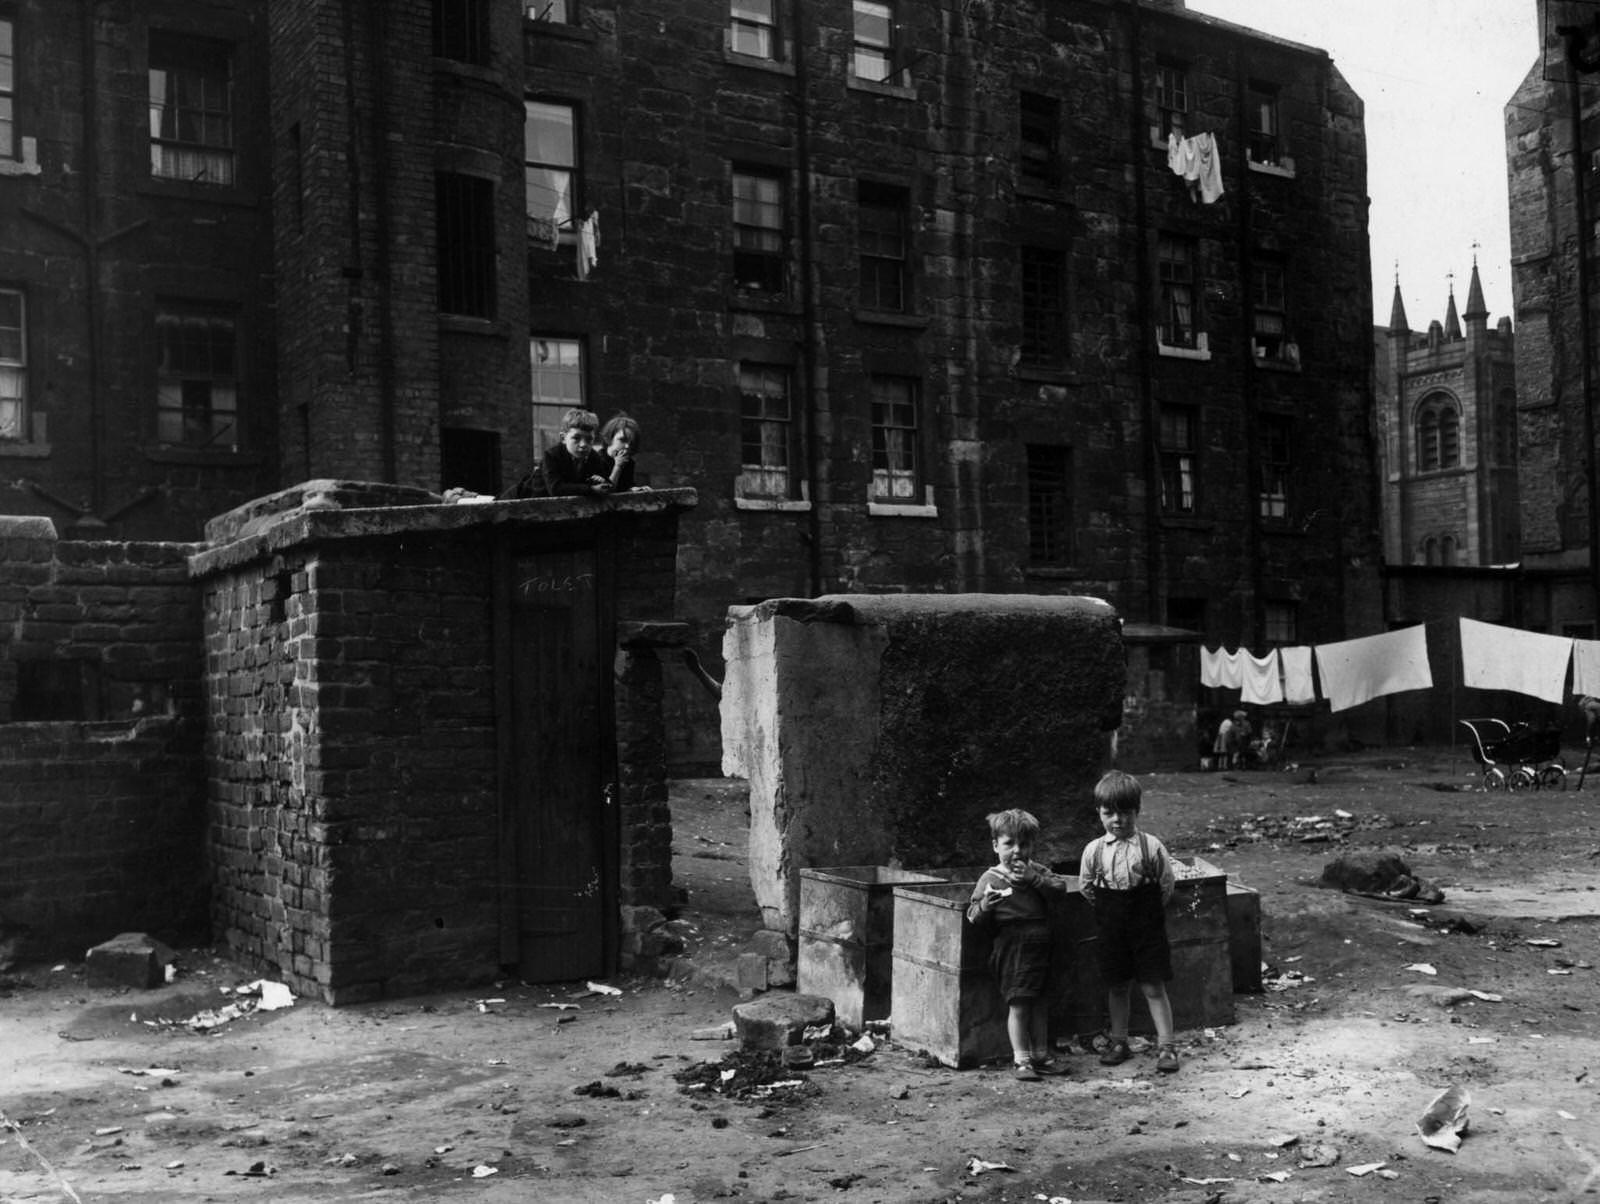 Children playing in a Glasgow slum which is to be demolished, 1956